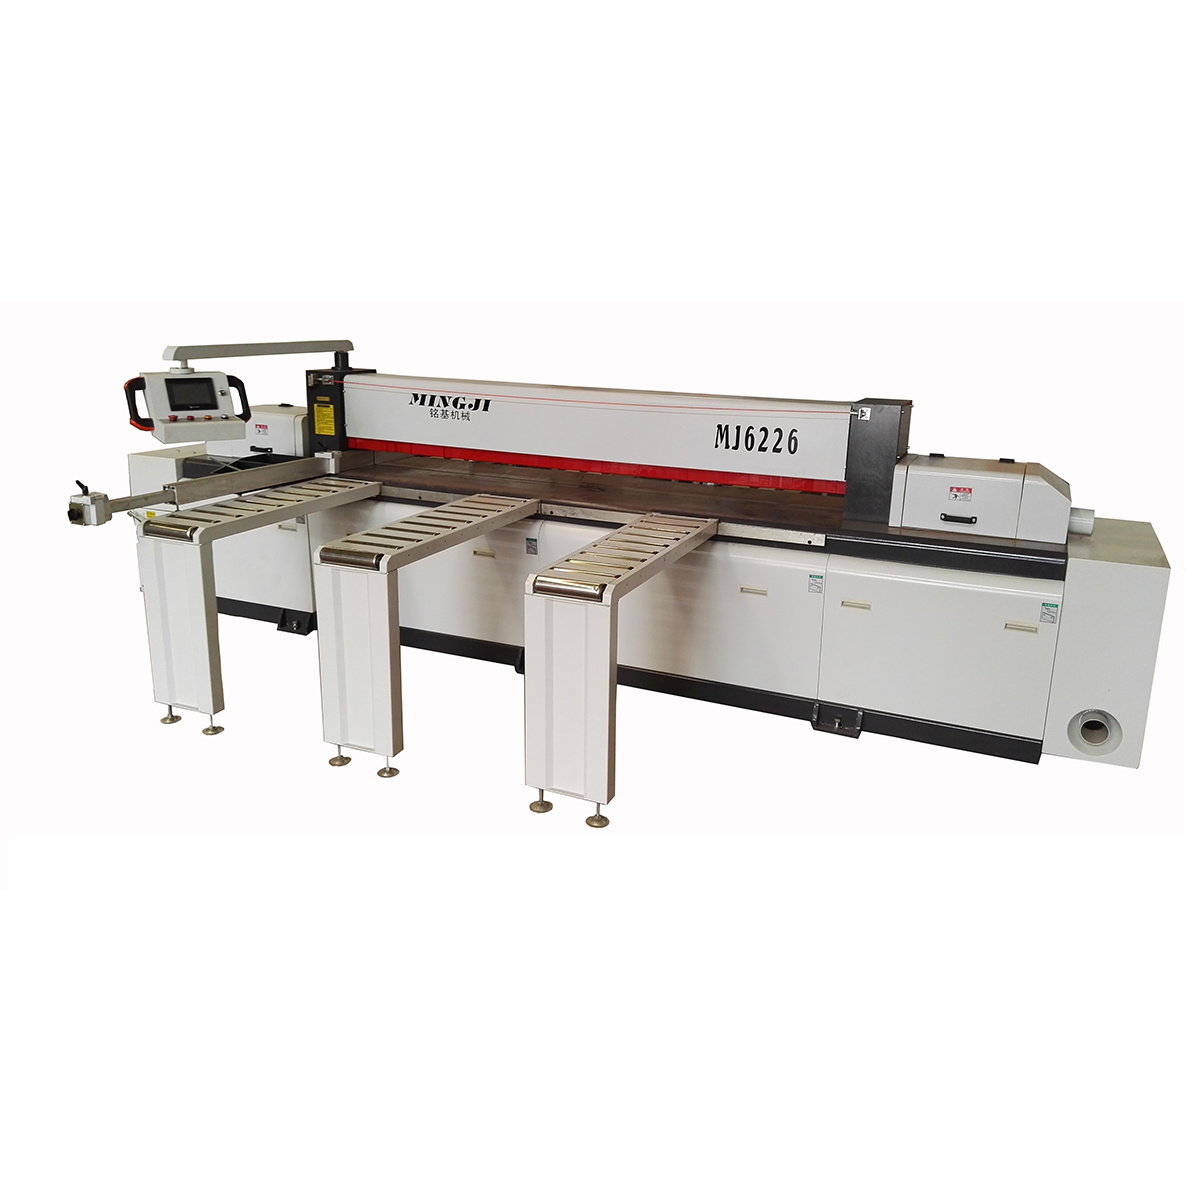 Woodworking Beam Saw for Cabinet Manufacturing